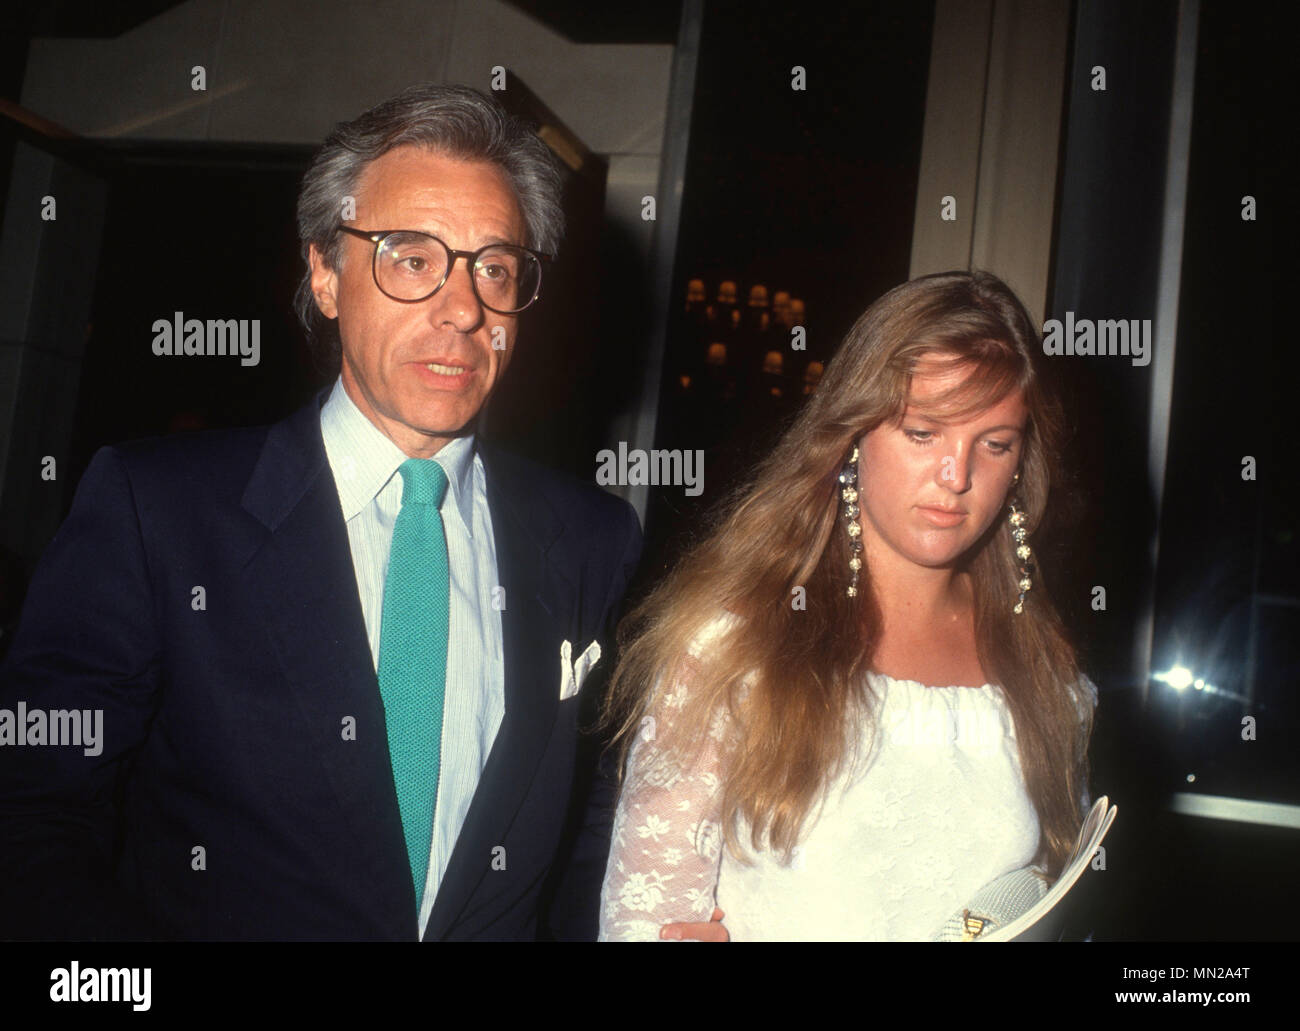 CENTURY CITY, CA  - JULY 28: (L-R) Director Peter Bogdanovich and wife Louise Stratten attend Golden Boot Awards on July 28, 1990 at the Century Plaza Hotel in Century City, California. Photo by Barry King/Alamy Stock Photo Stock Photo